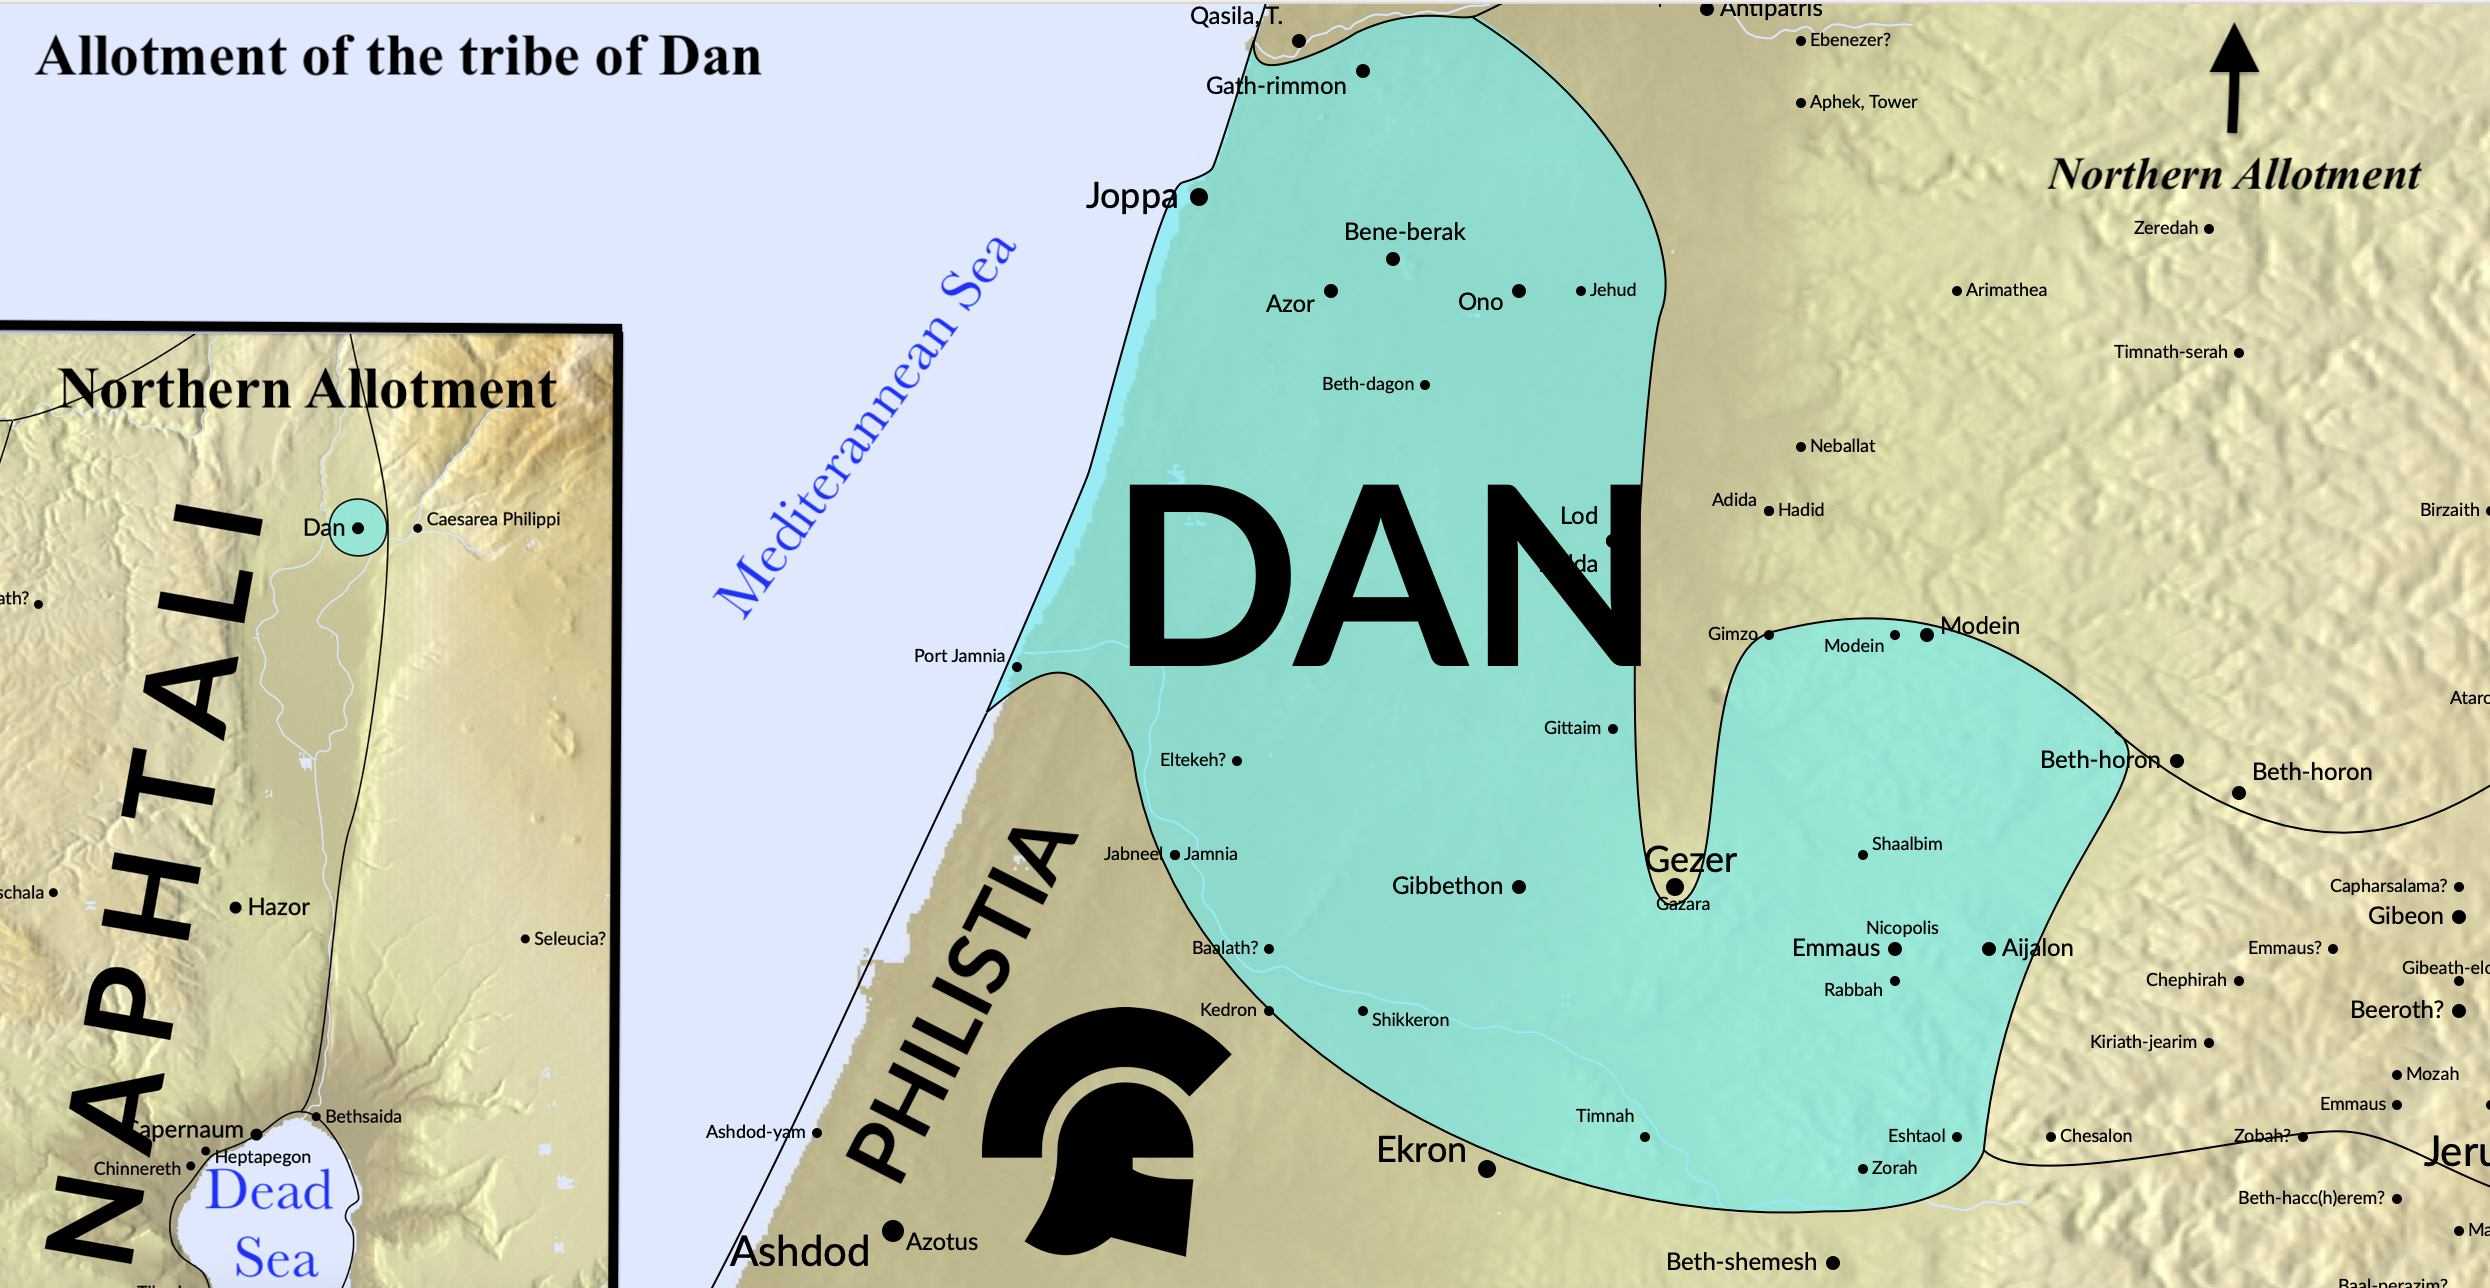 A map of the allotment for the tribe of Dan.